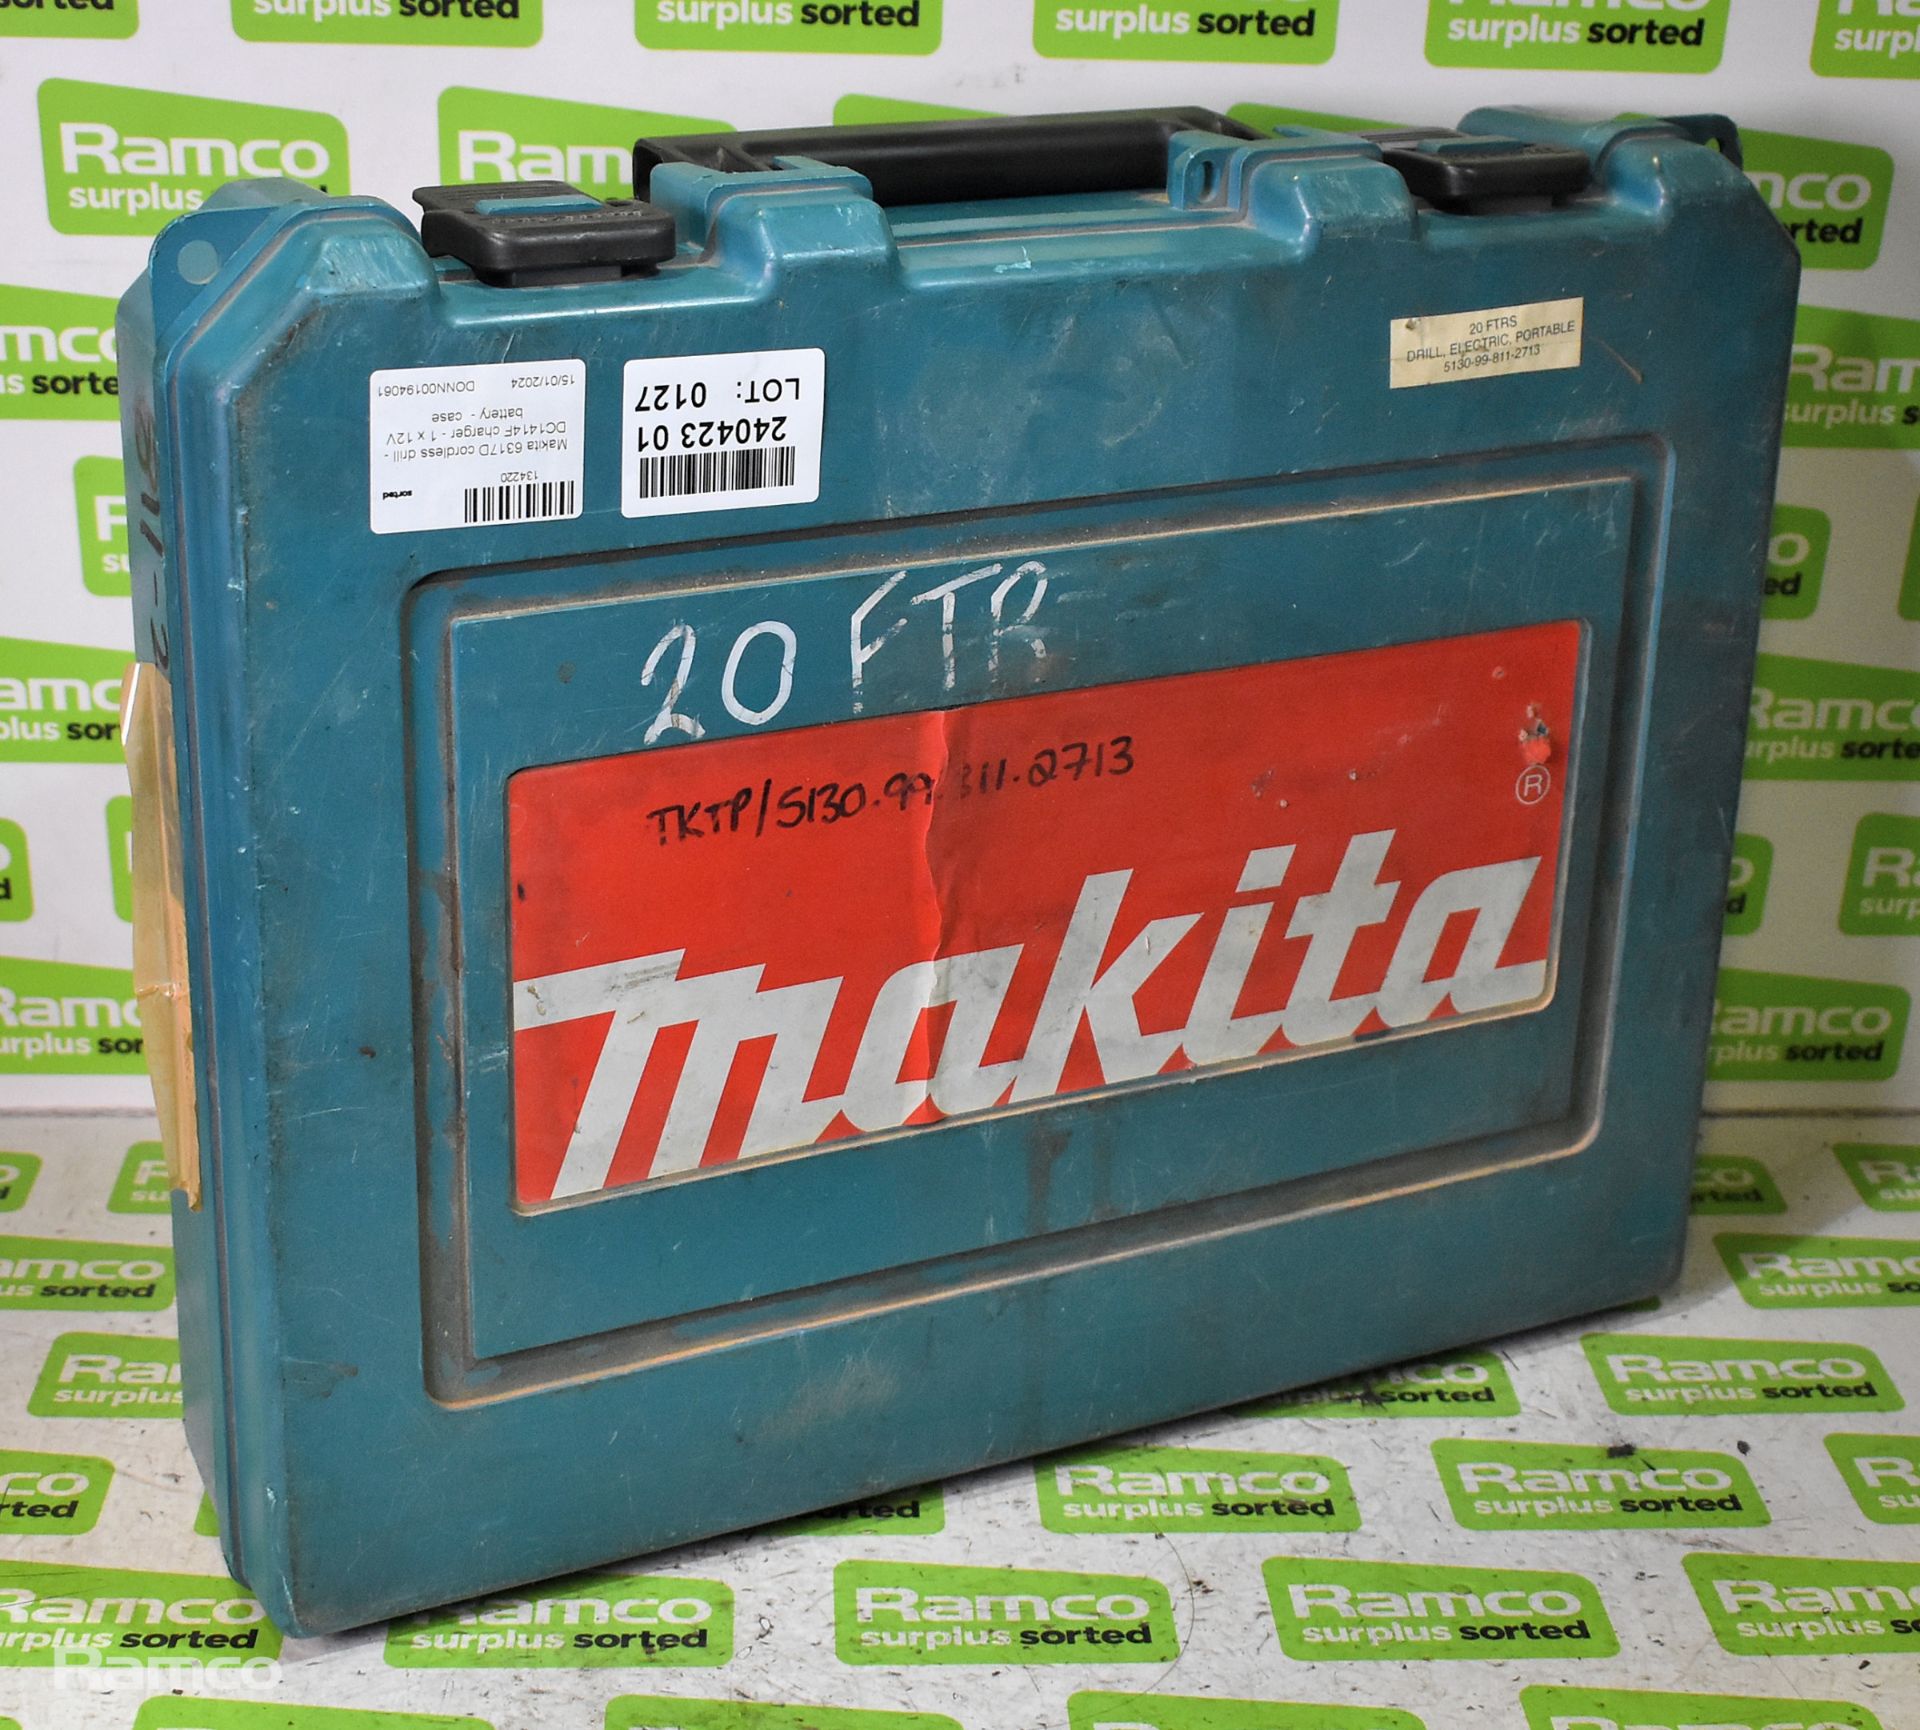 Makita 6317D cordless drill - DC1414F charger - 1x 12V battery - case - Image 5 of 5